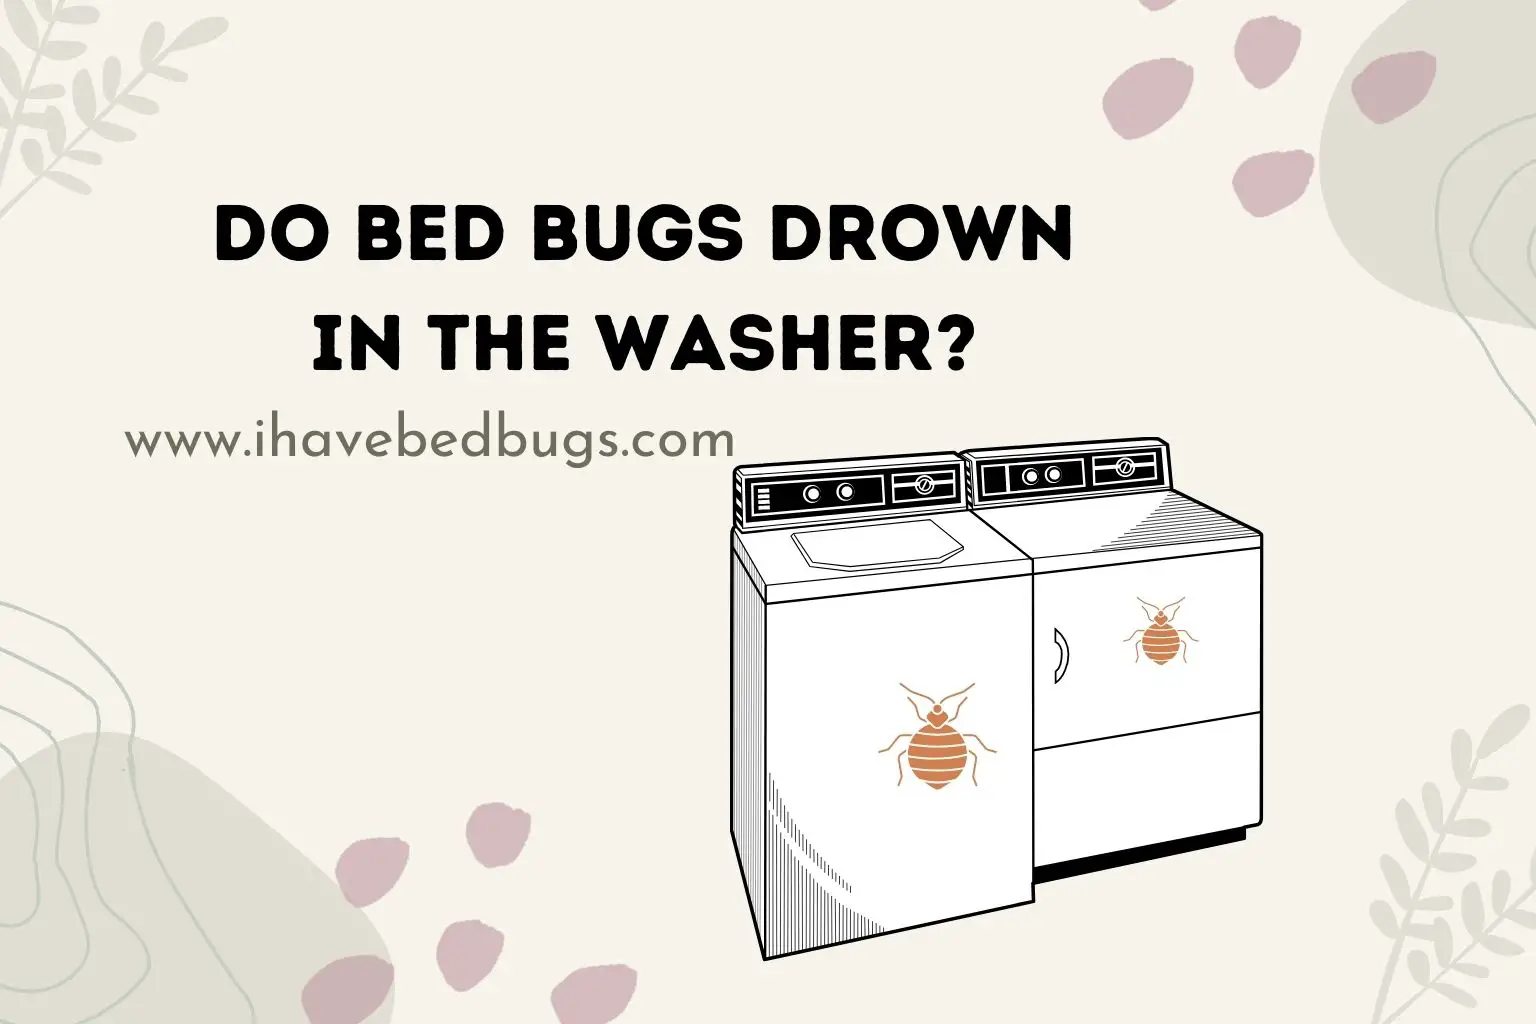 Do bed bugs drown in the washer